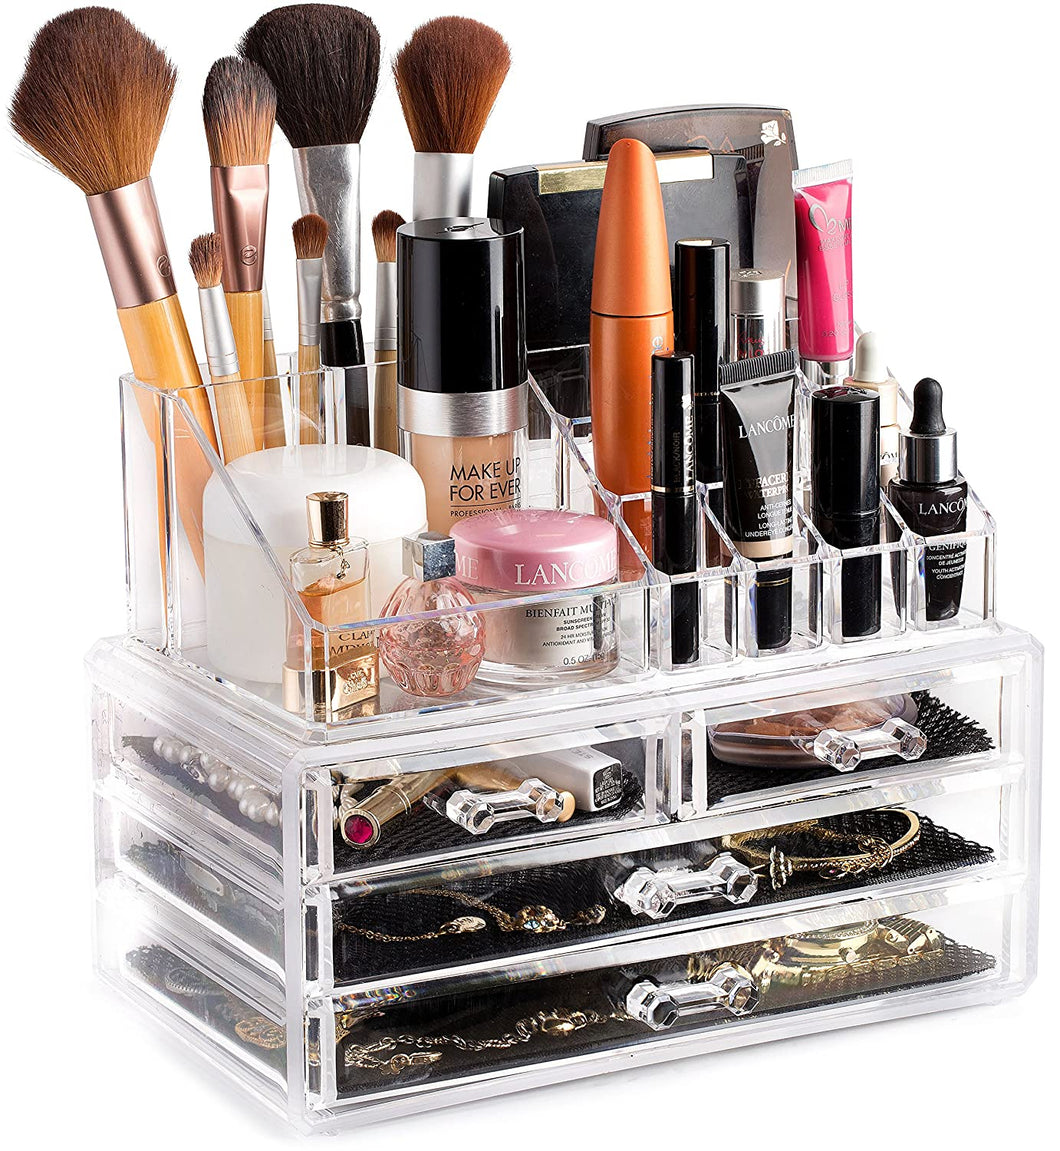 Clear Cosmetic Storage Organizer - Easily Organize Your Cosmetics, Jewelry and Hair Accessories. Looks Elegant Sitting on Your Vanity, Bathroom Counter or Dresser. Clear Design for Easy Visibility